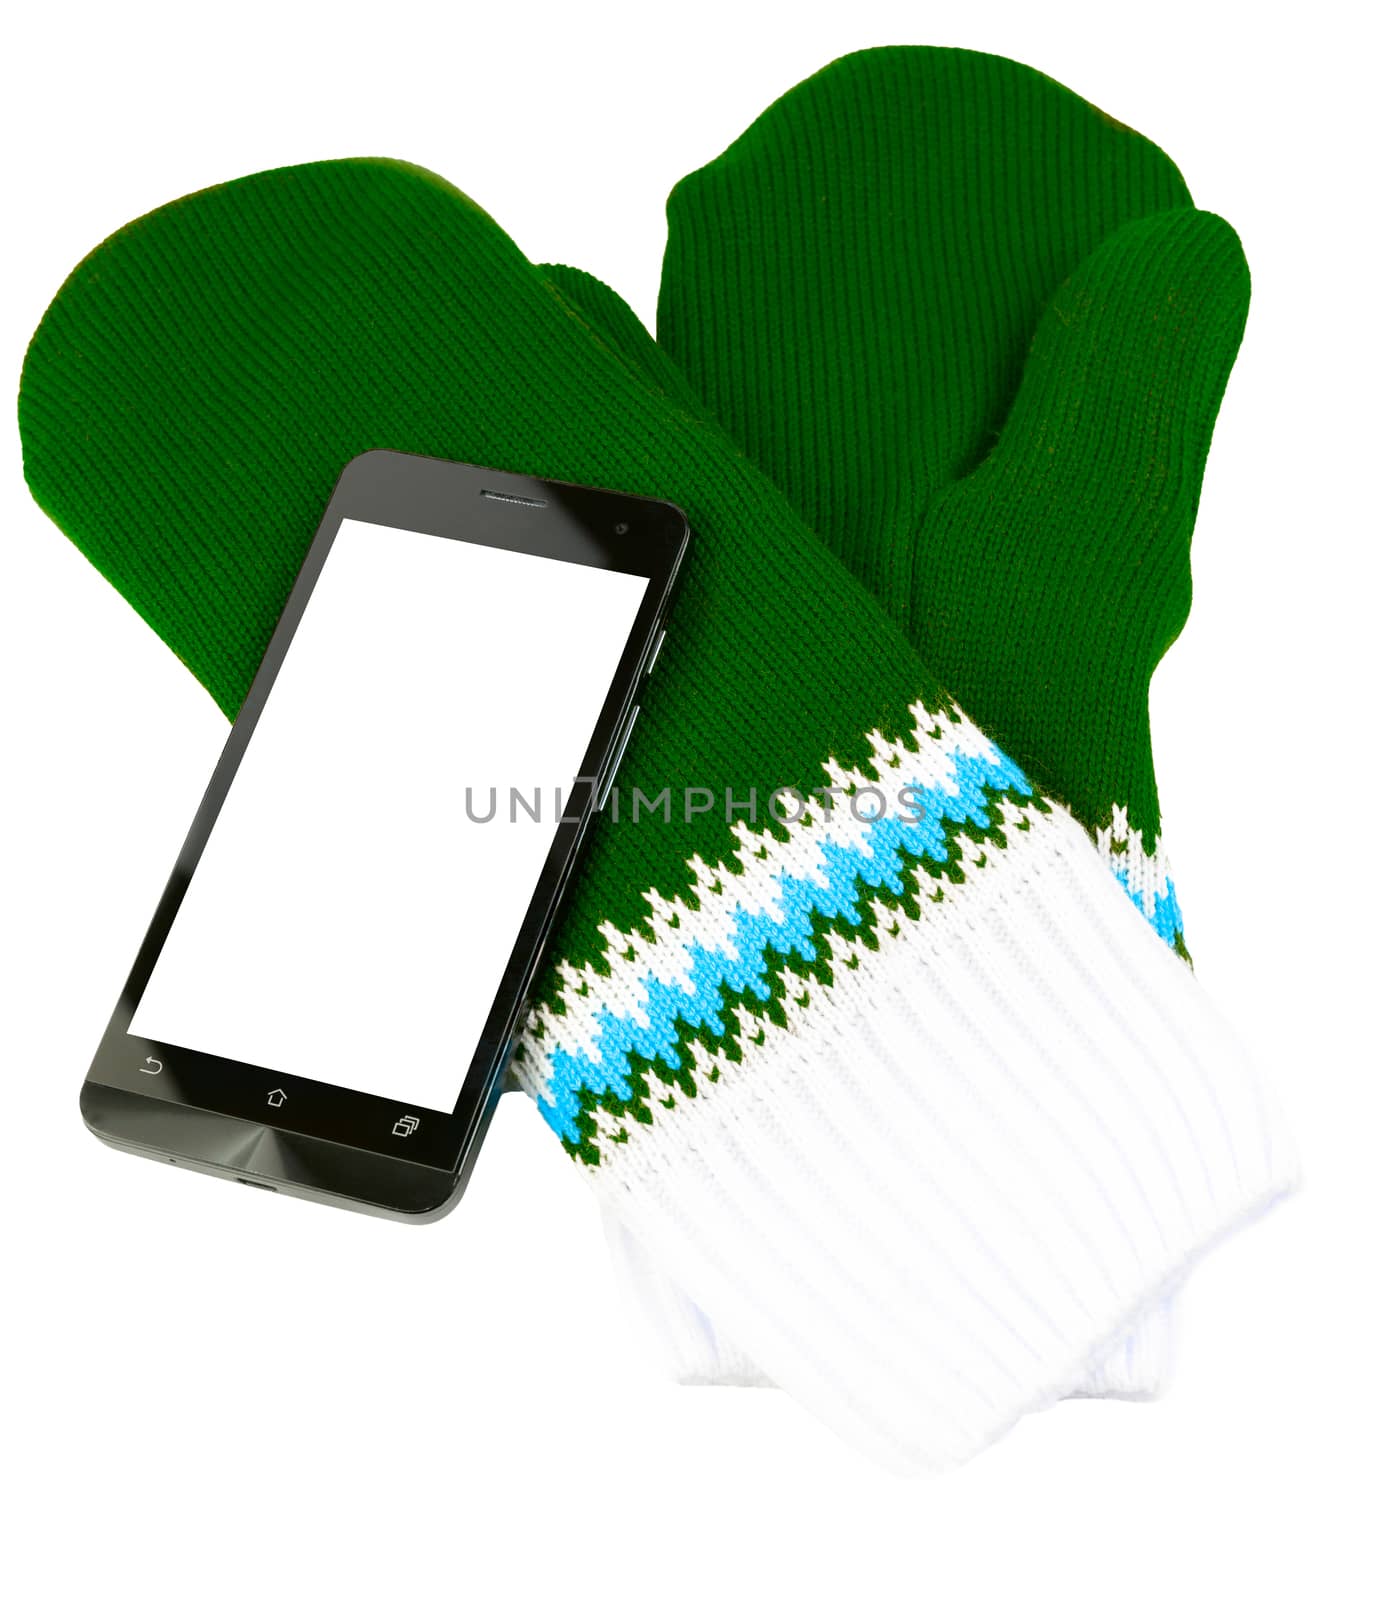 green and white knited mittens with cellphone isolated on white background.